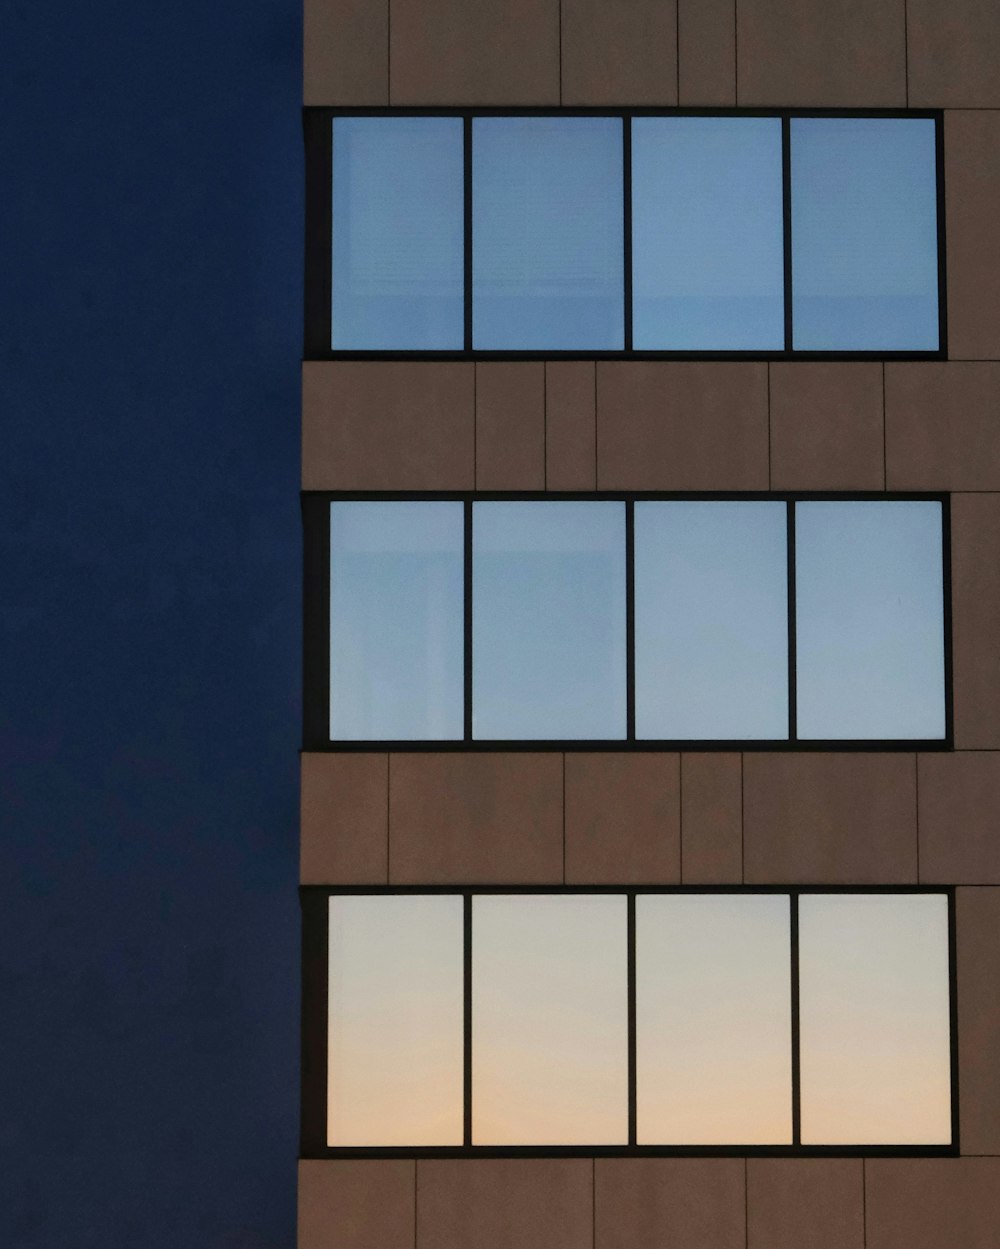 a tall building with lots of windows at night